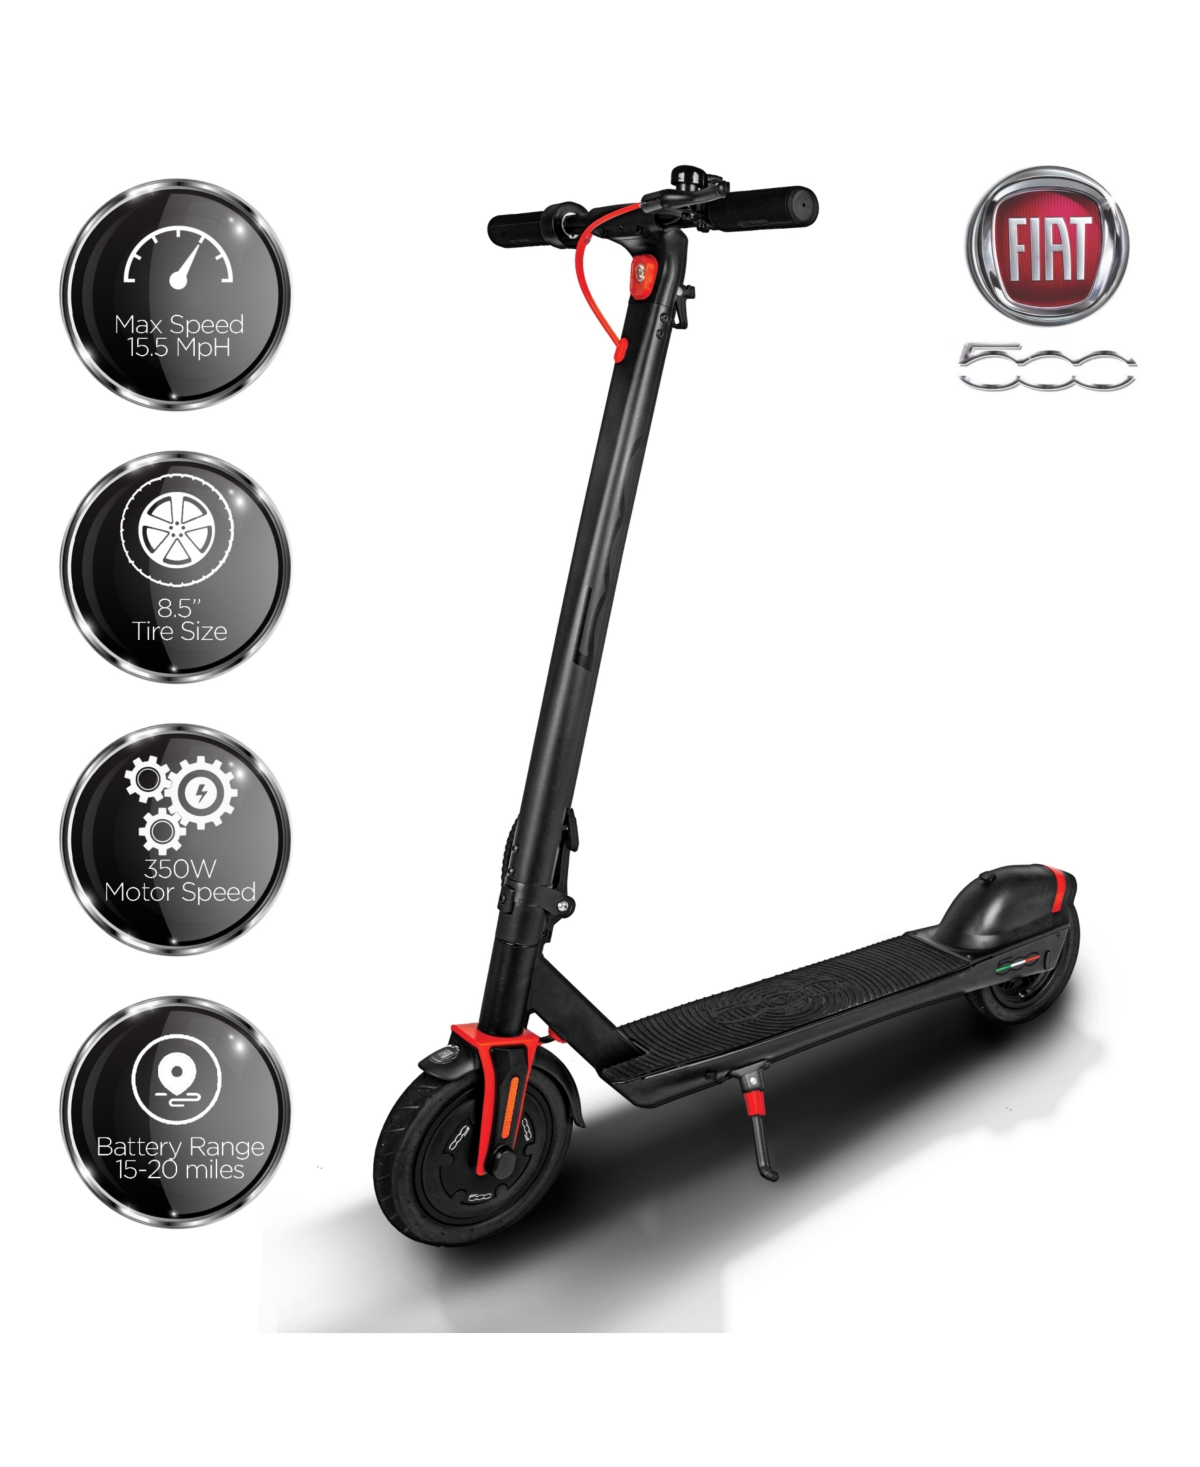 Fiat Folding Electric Scooter In Black